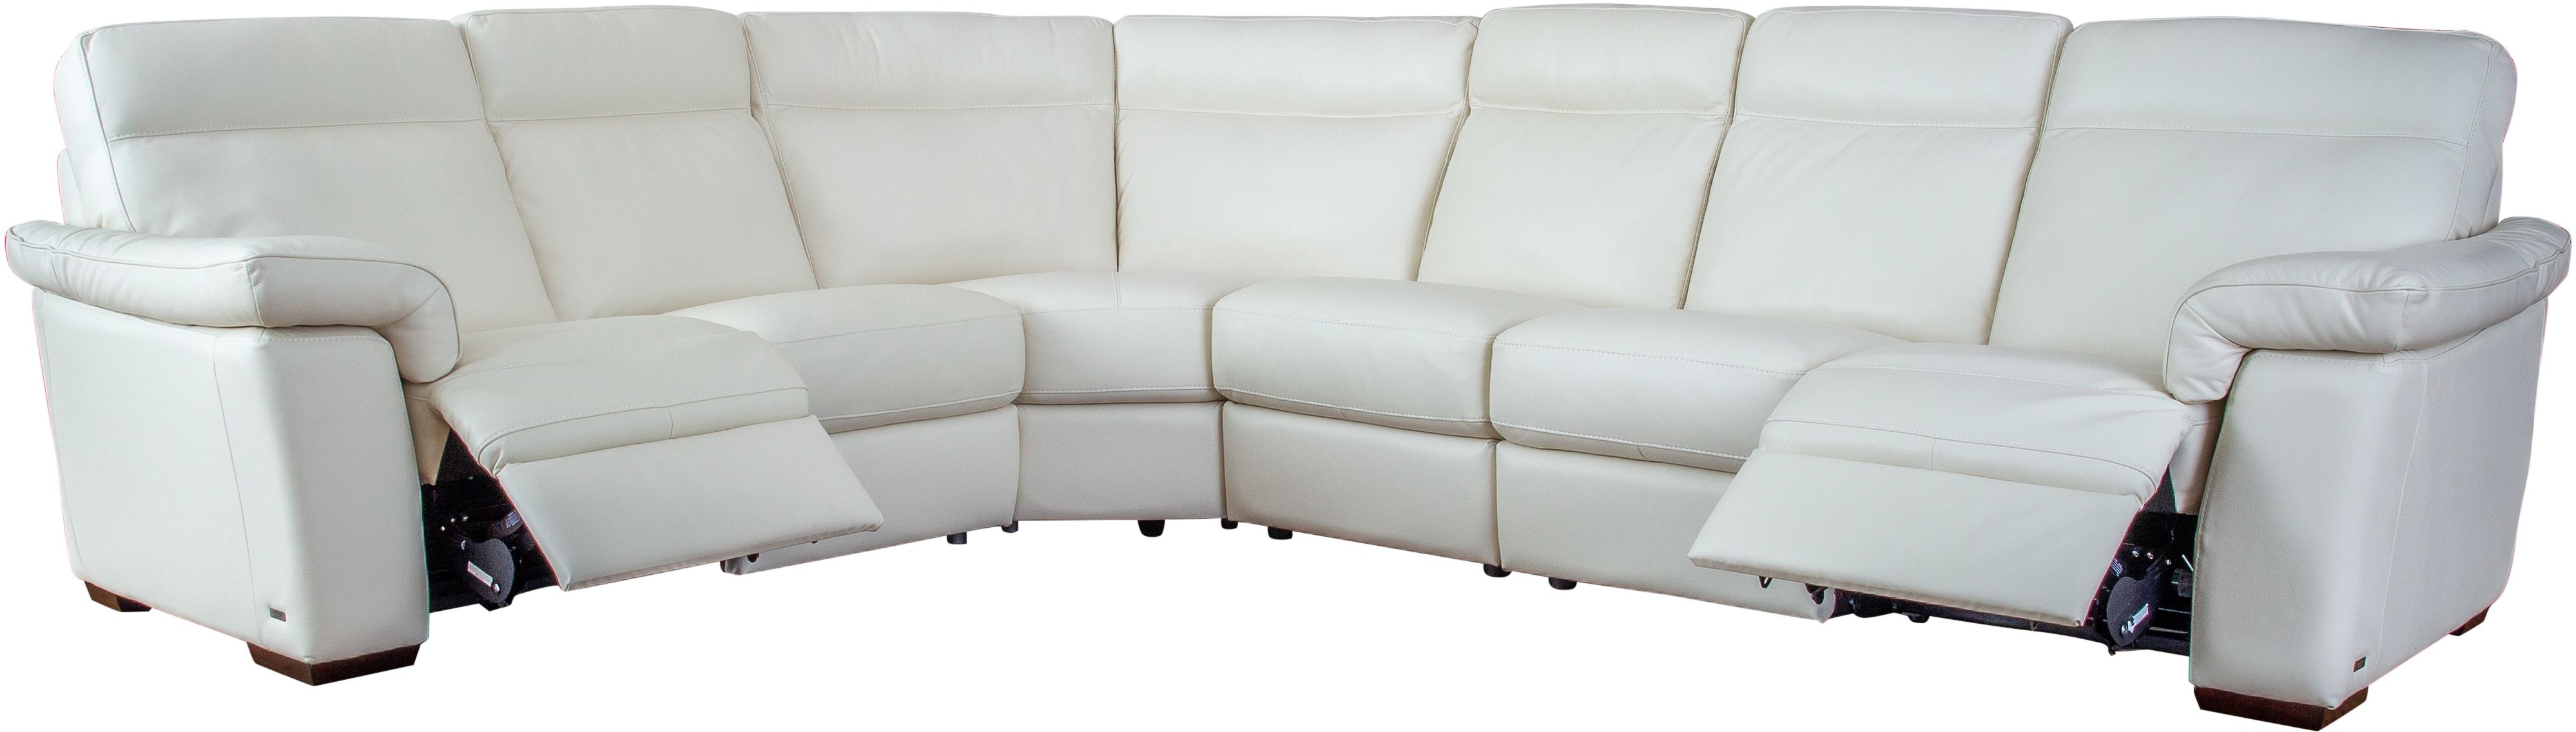 Natuzzi Editions 4pc Power Reclining Leather Myers, Sectional FL - Florida Fort - Gallery